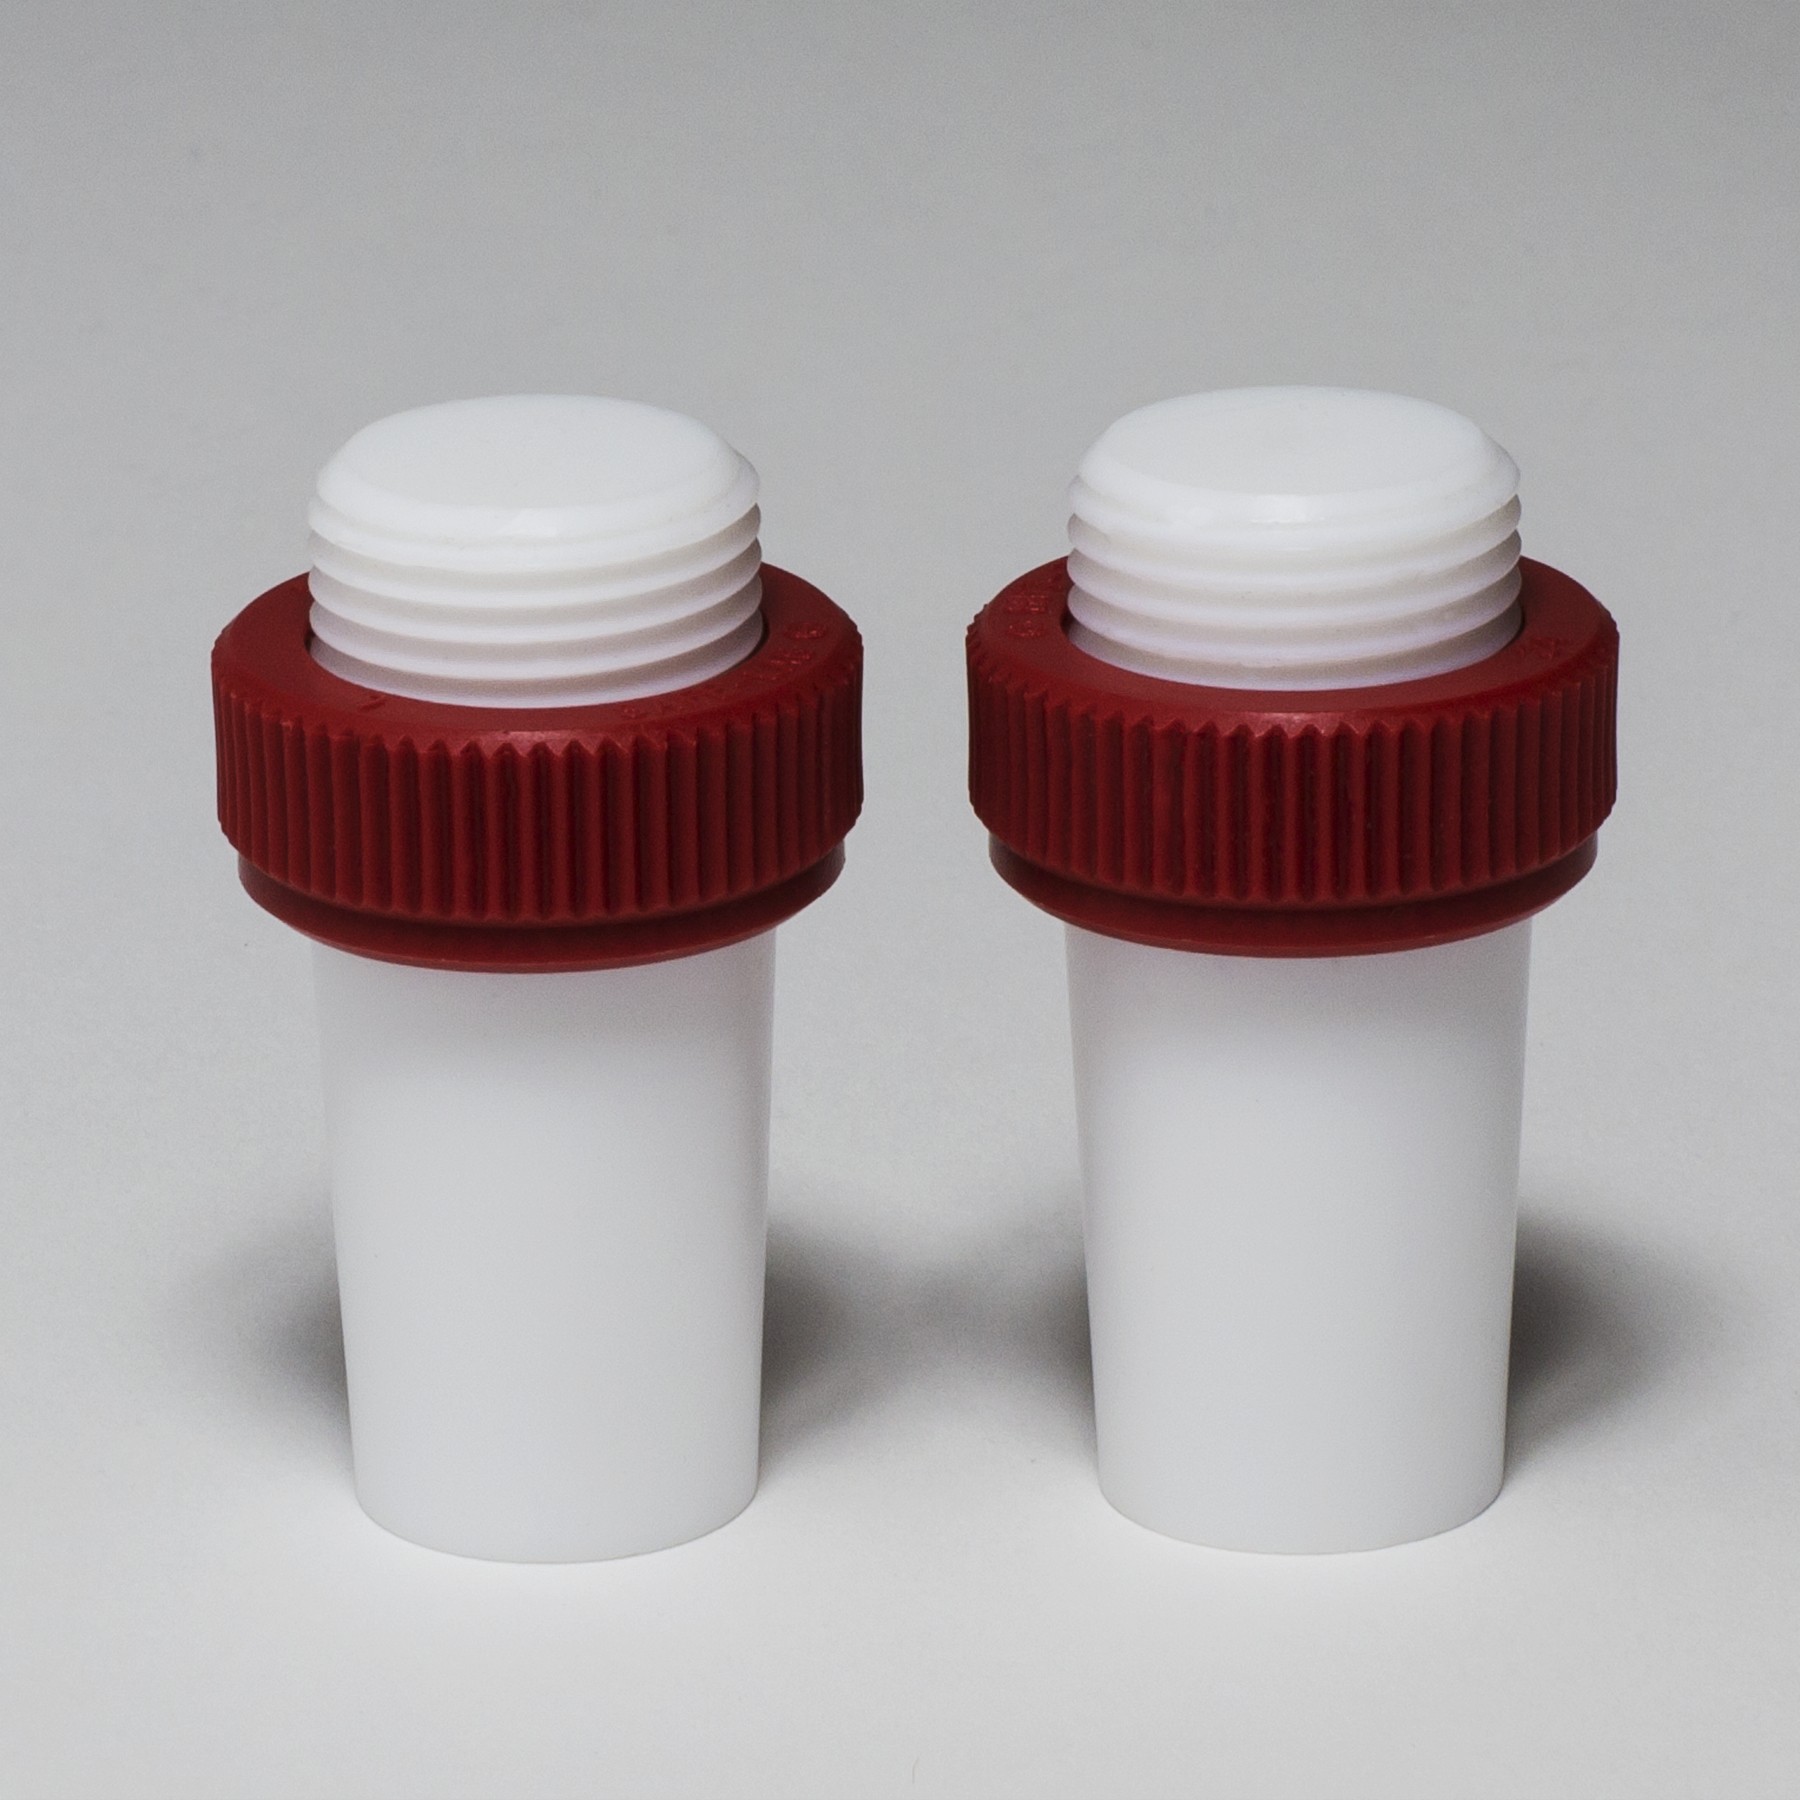 SP Bel-Art Safe-Lab Hollow Teflon PTFE Stoppers for 24/40 Tapered Joints (Pack of 2)